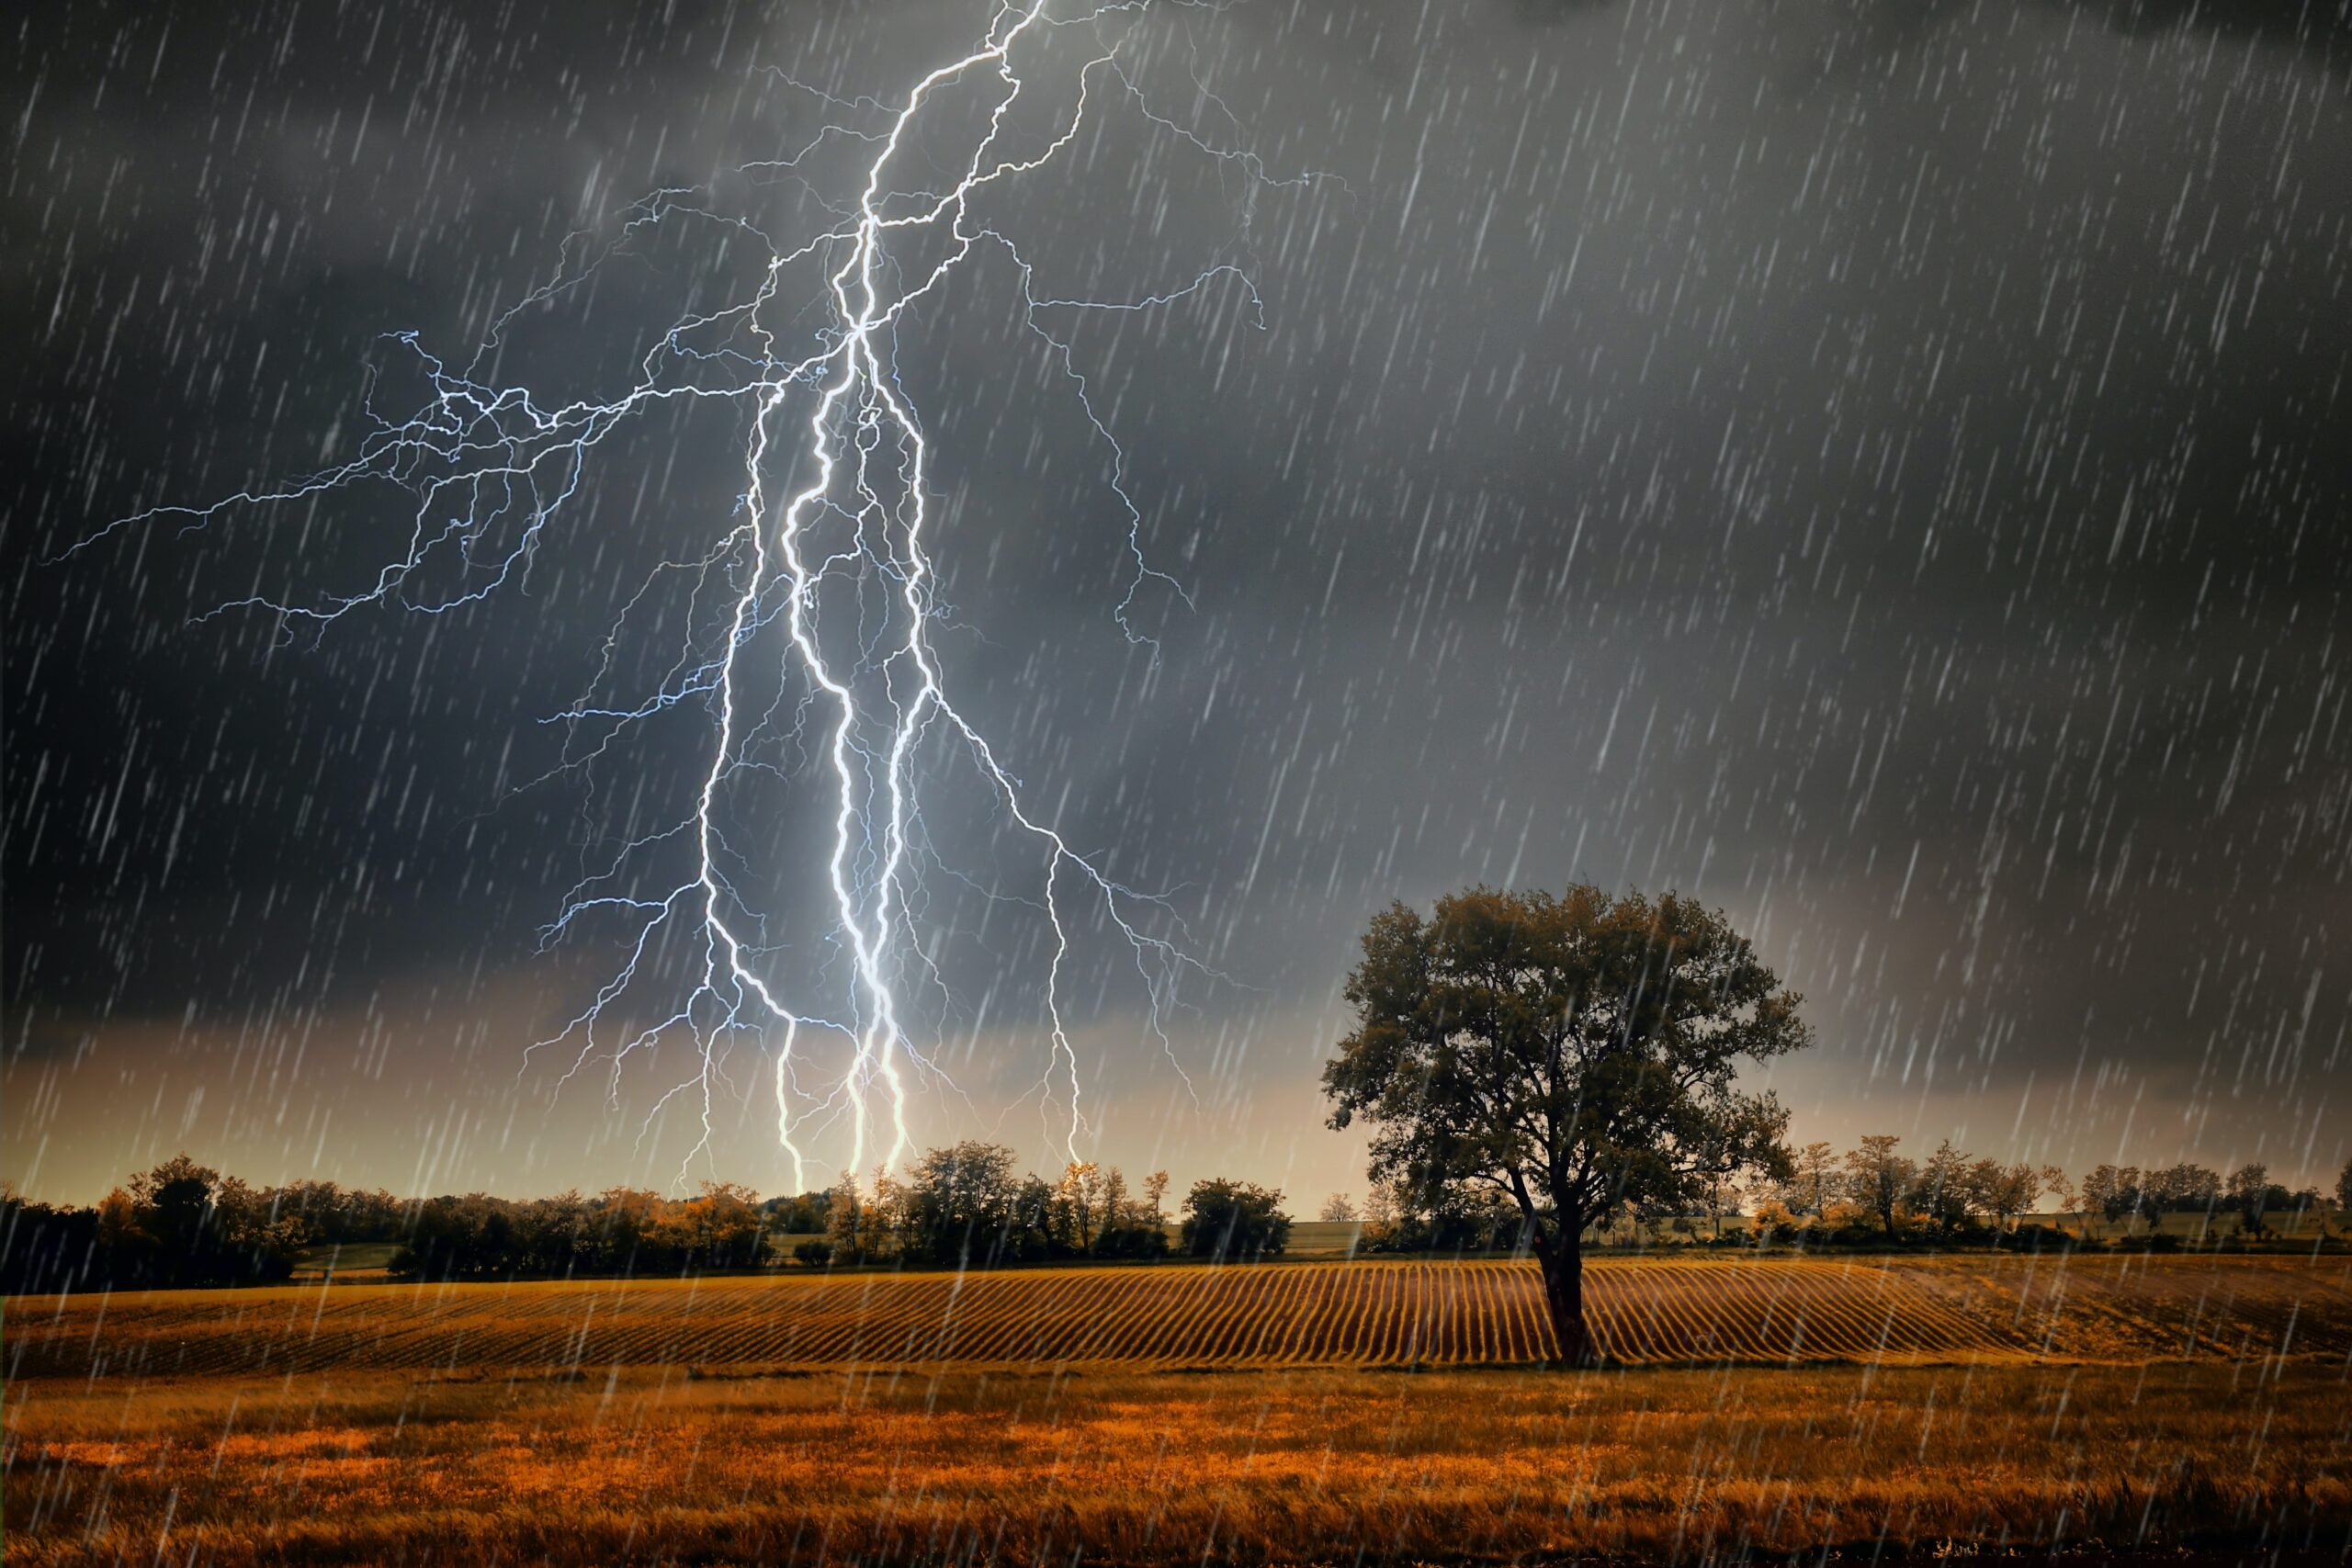 Lightning and other uncertainties